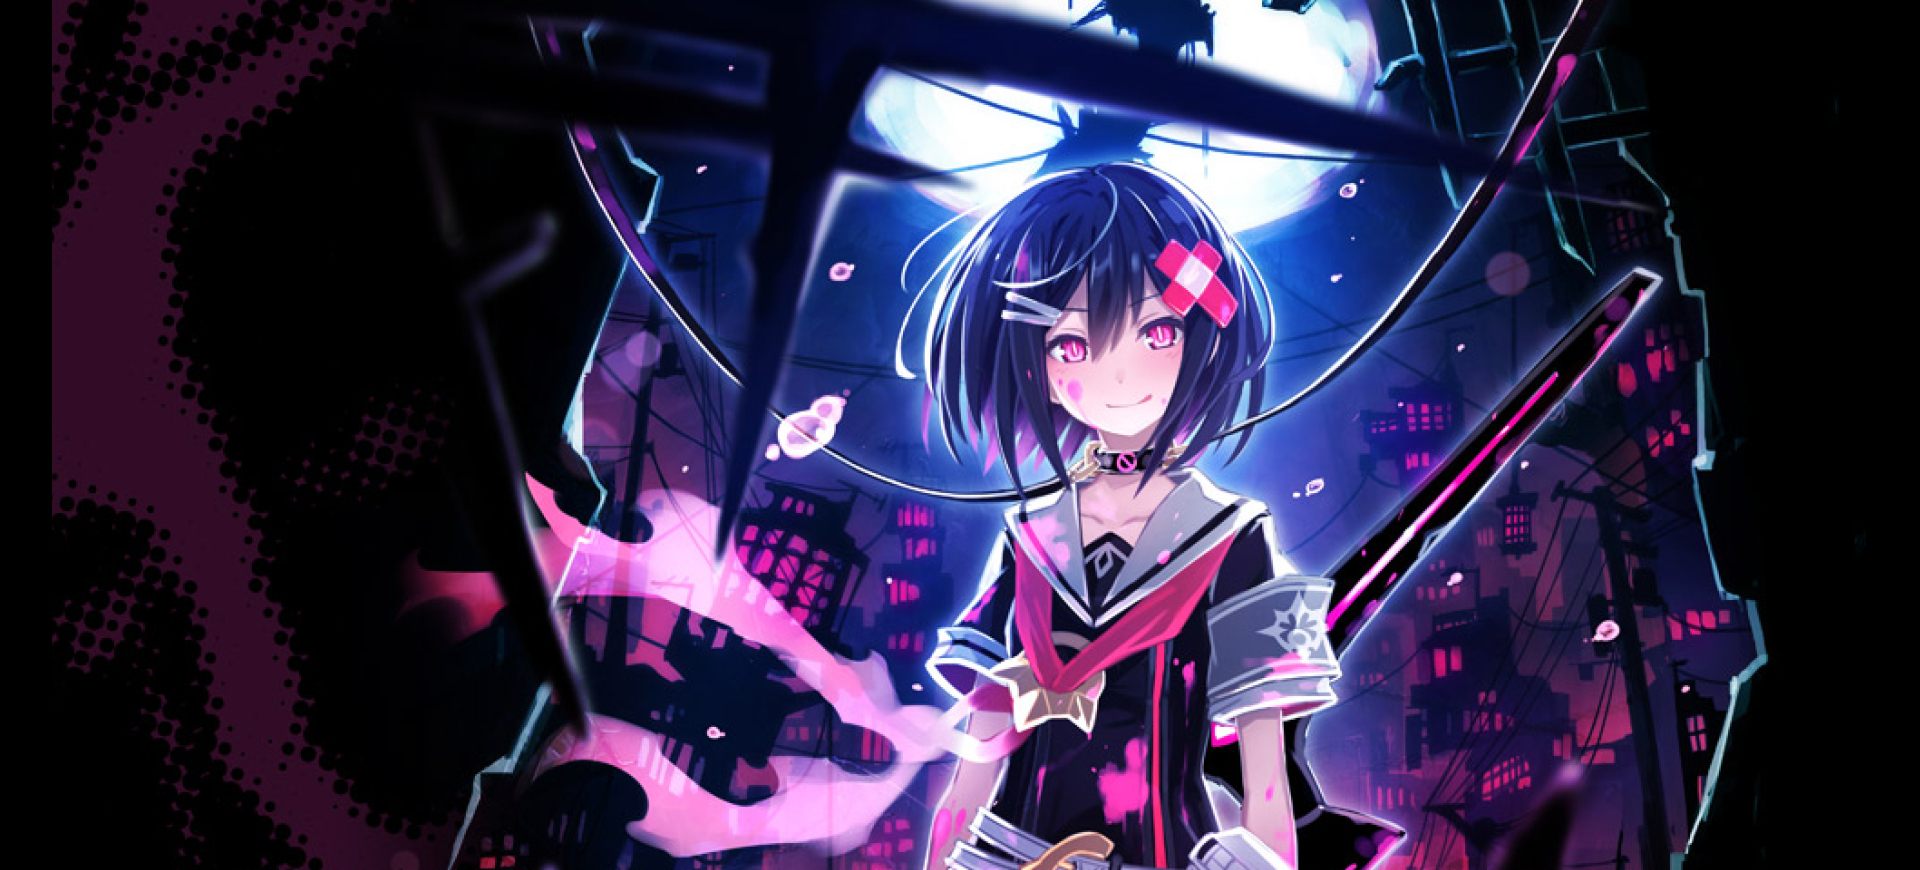 Mary Skelter